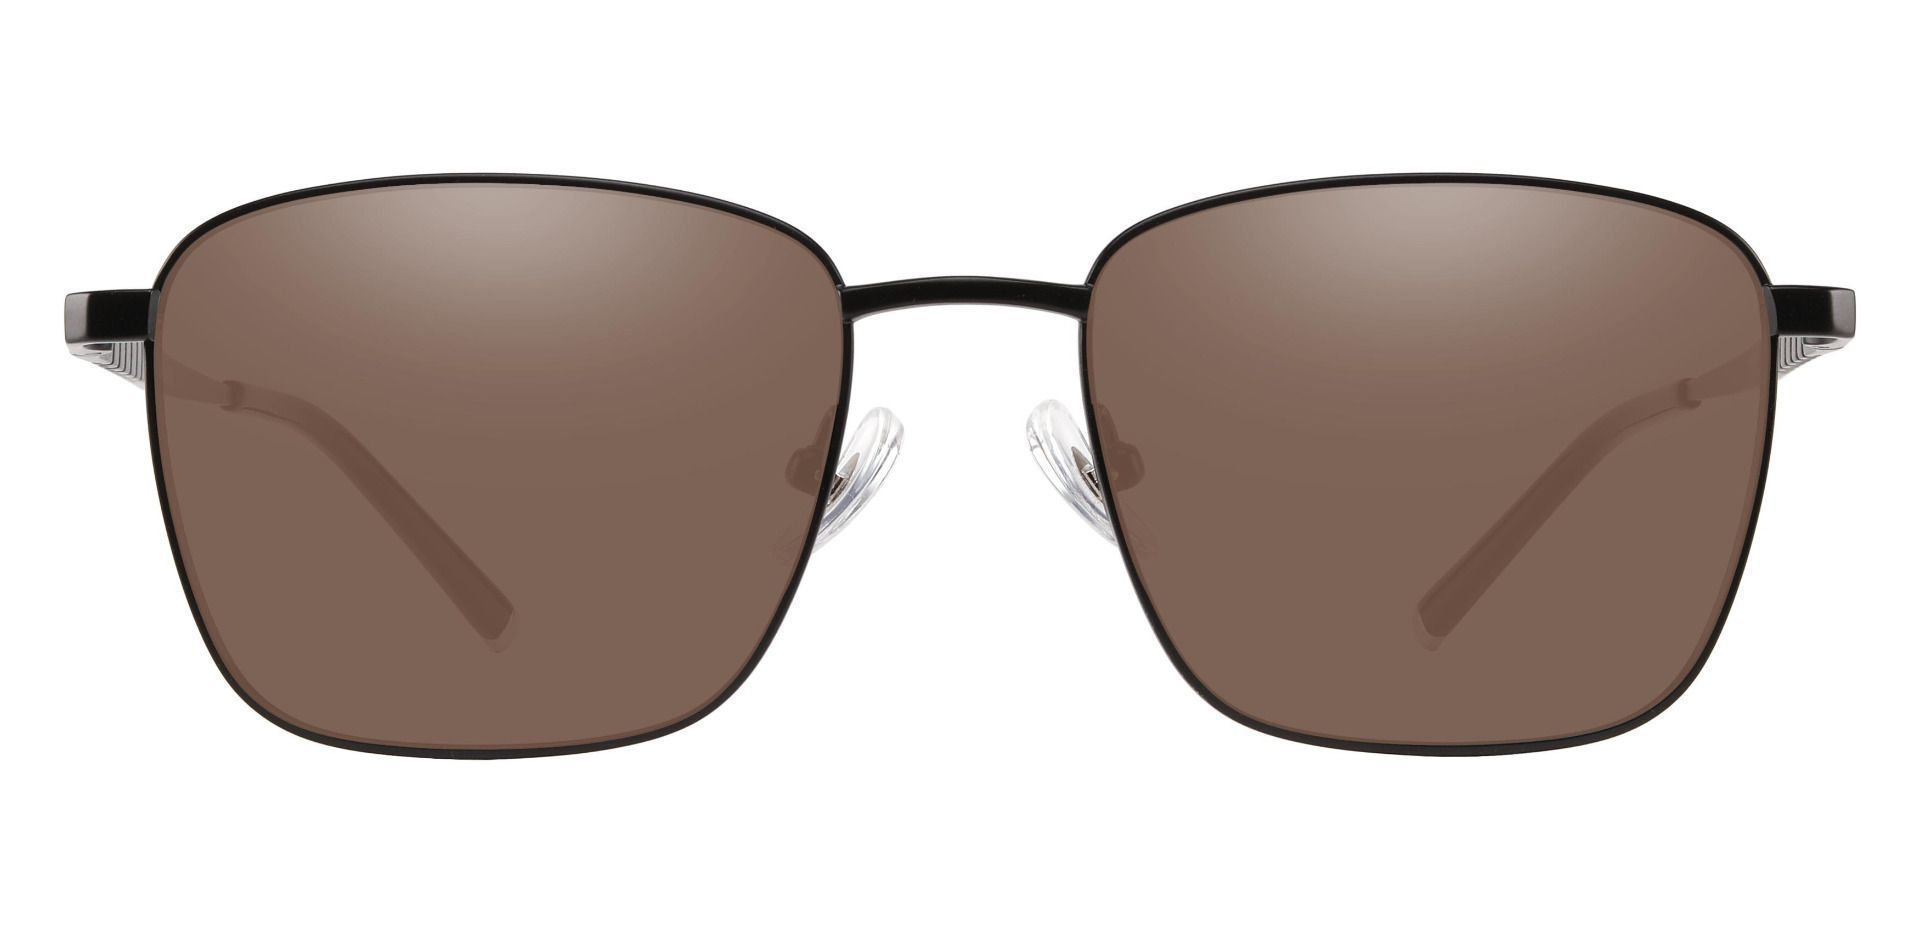 May Square Prescription Sunglasses - Black Frame With Brown Lenses